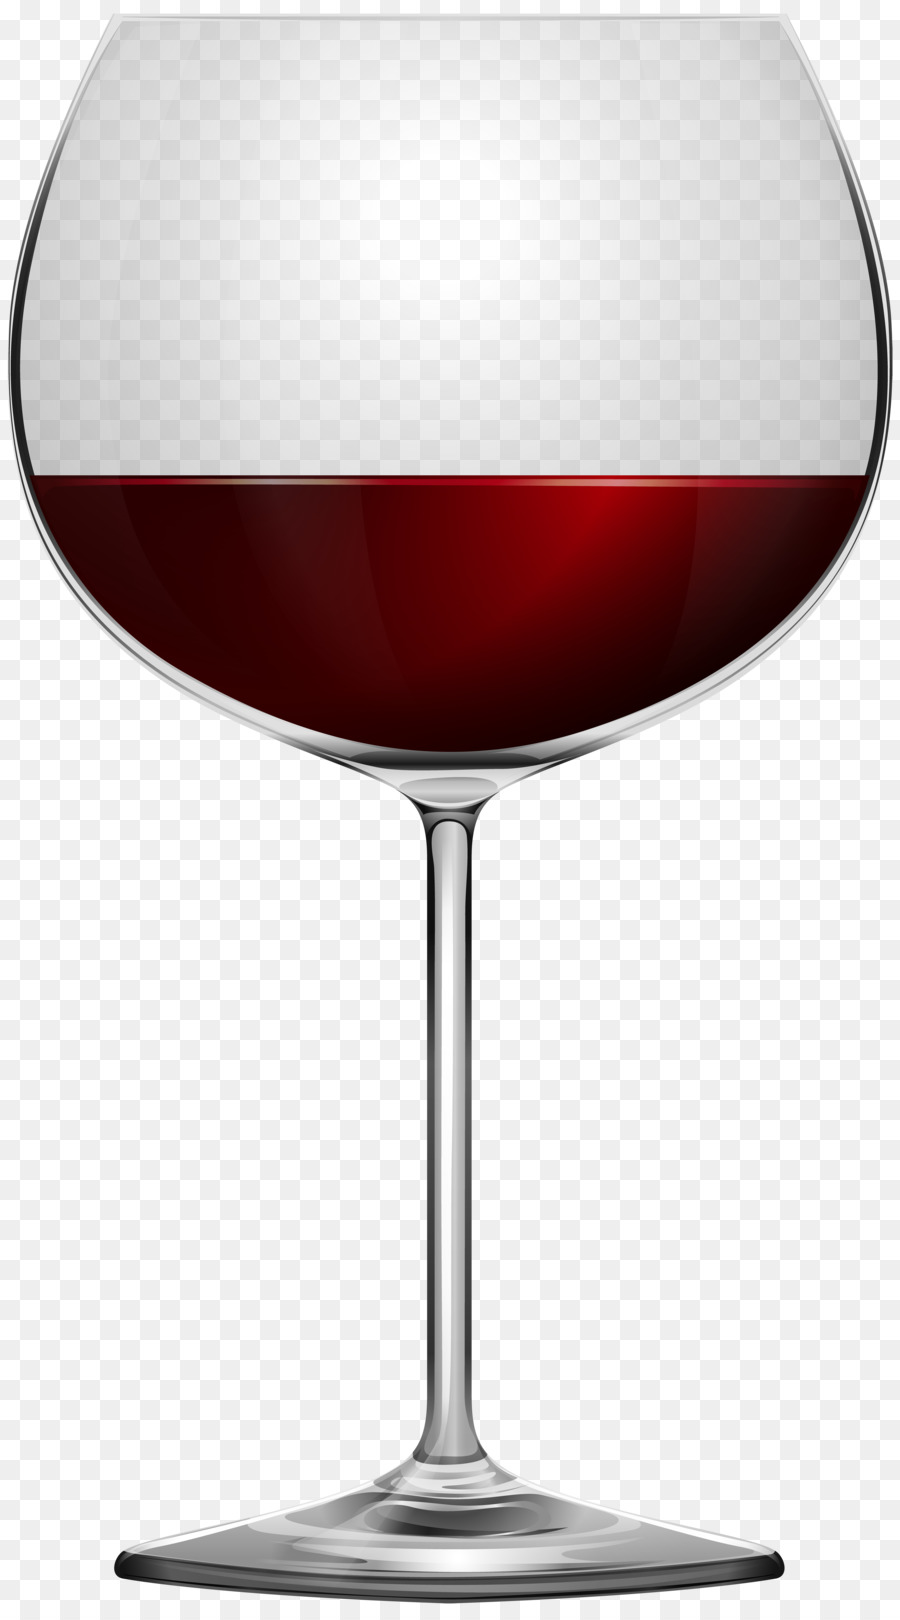 Wine glass Red Wine Stemware Clip art - red butterfly png download - 4452*8000 - Free Transparent Wine png Download.